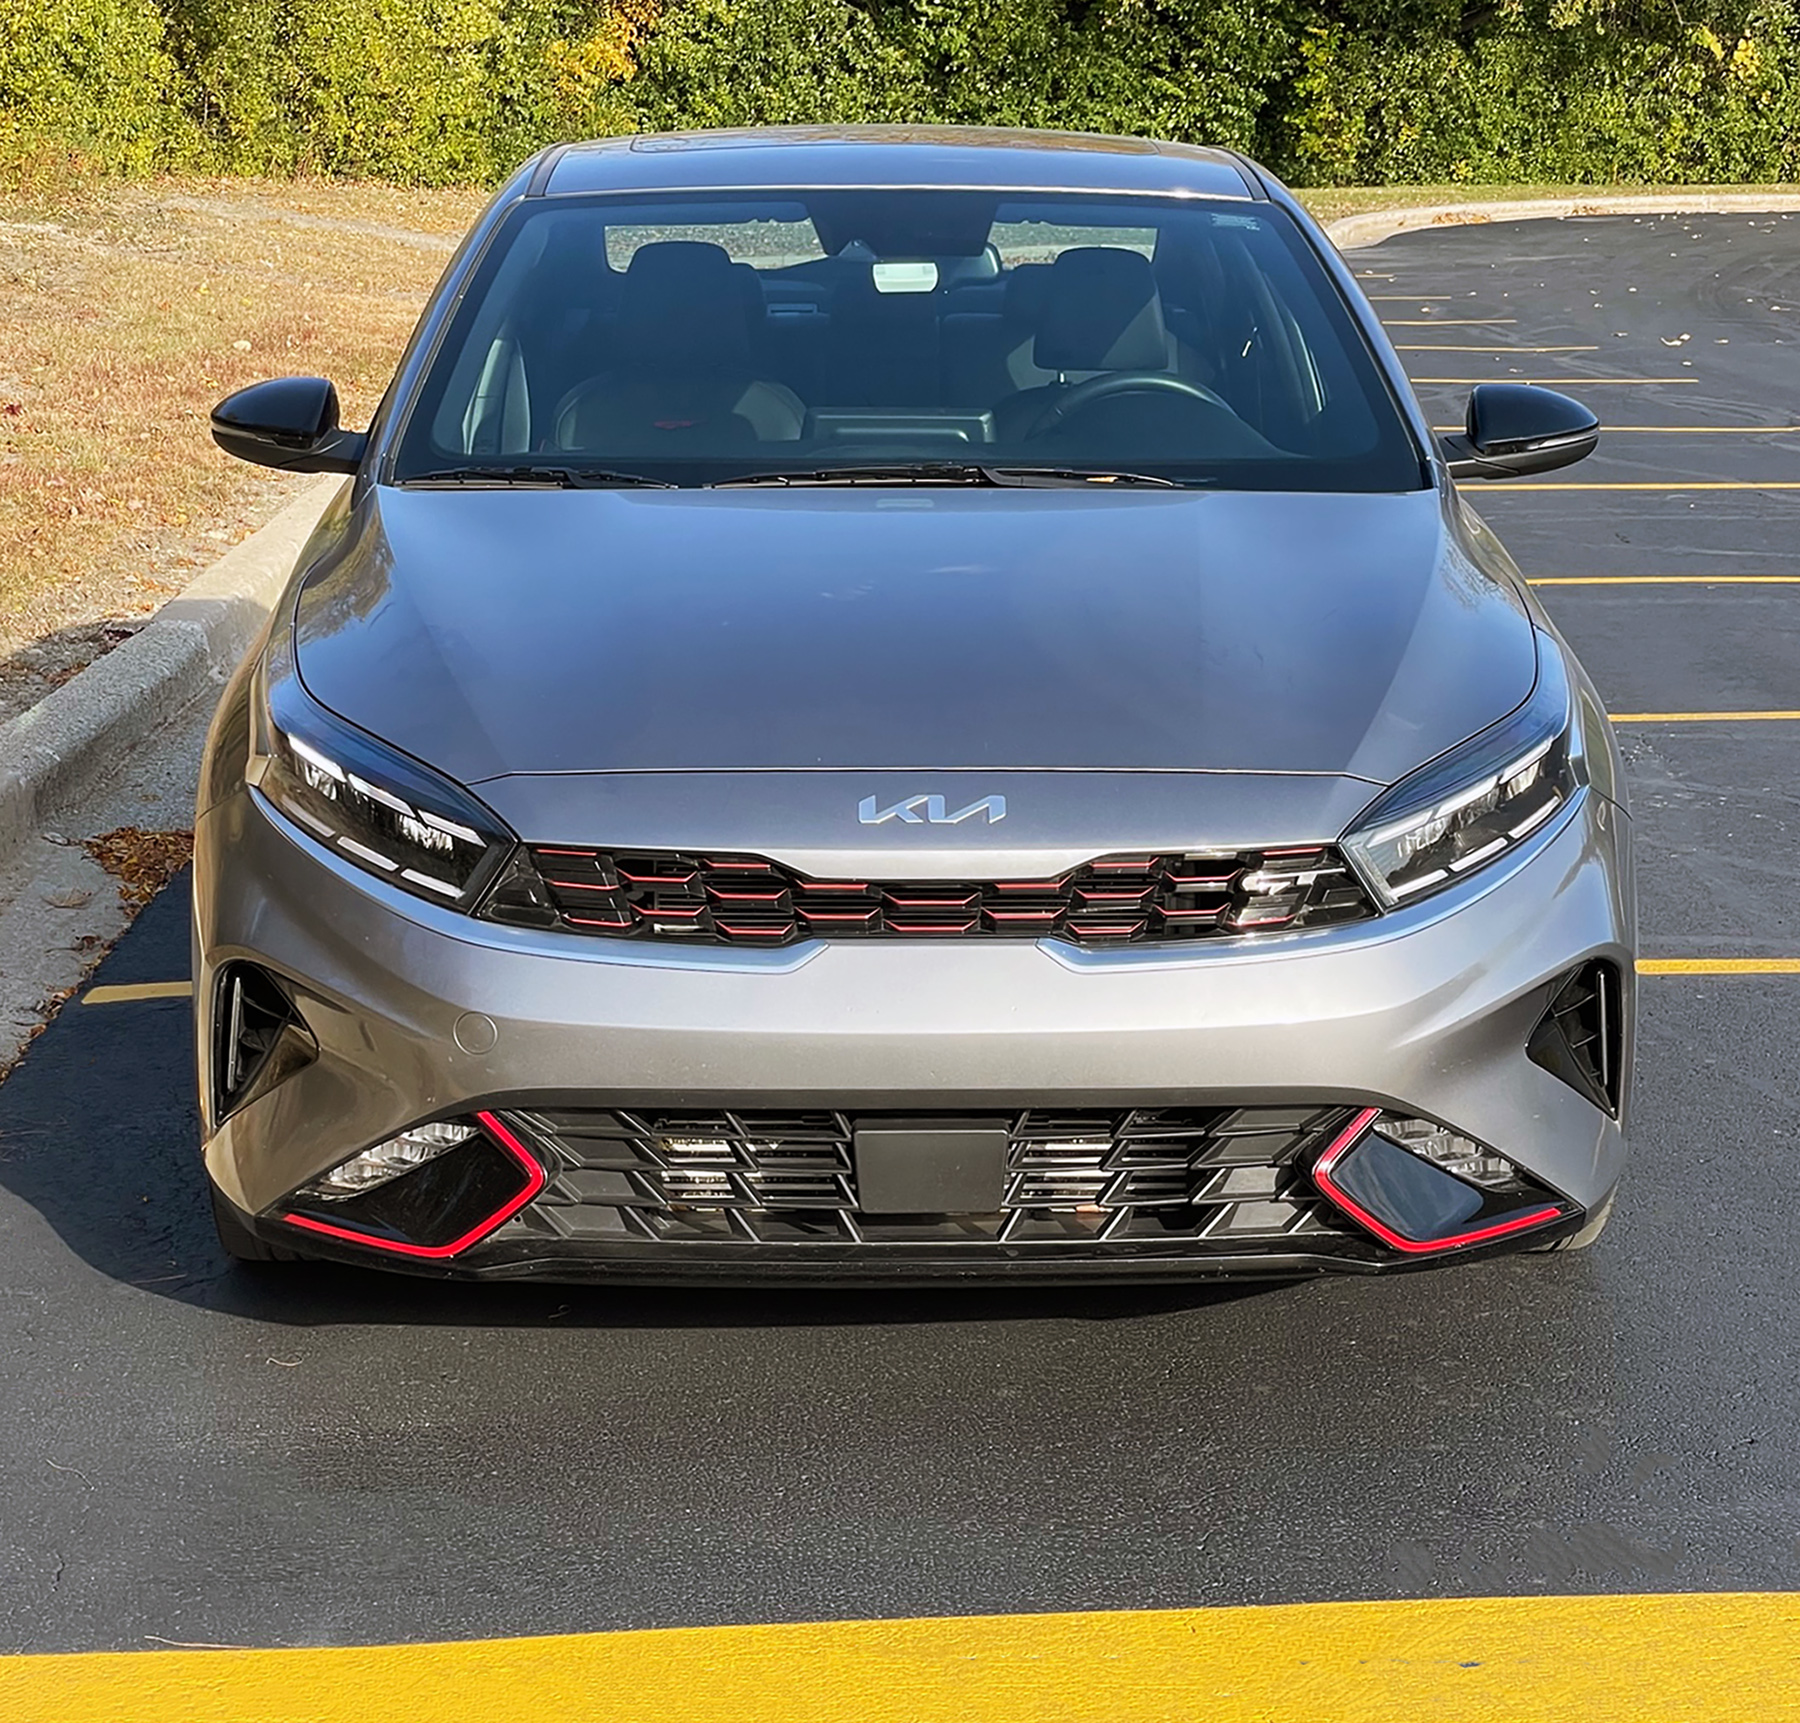 2022 Kia Forte GT: Test Drive | The Daily Drive | Consumer Guide®